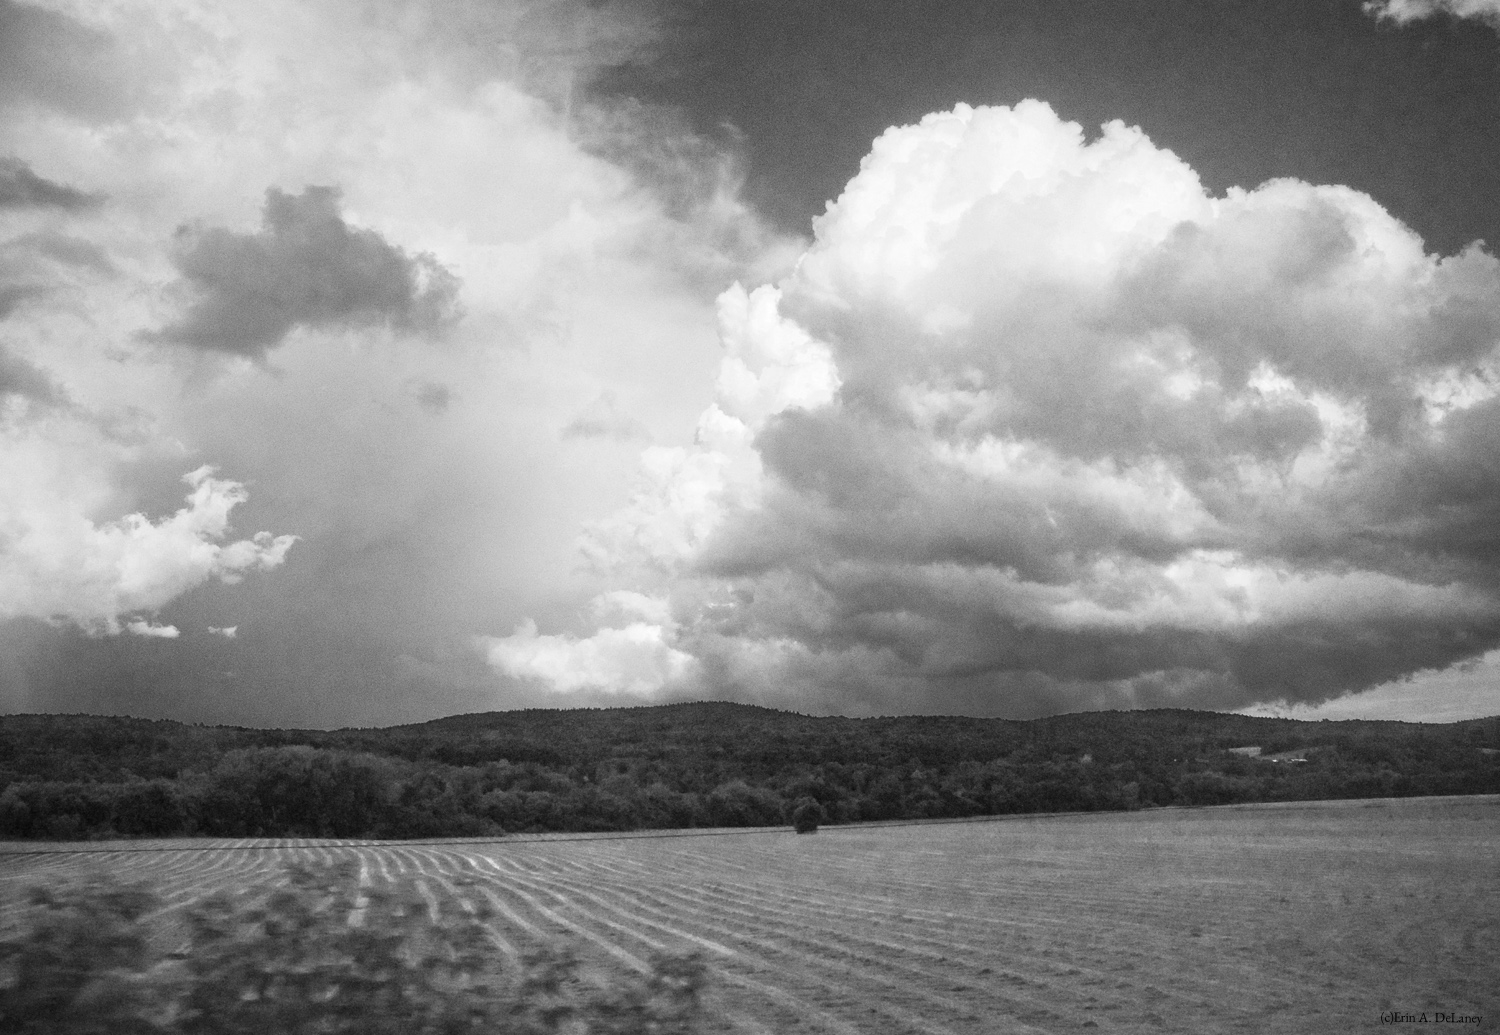 Clouds and Fields Vermont, Black and White, 2014